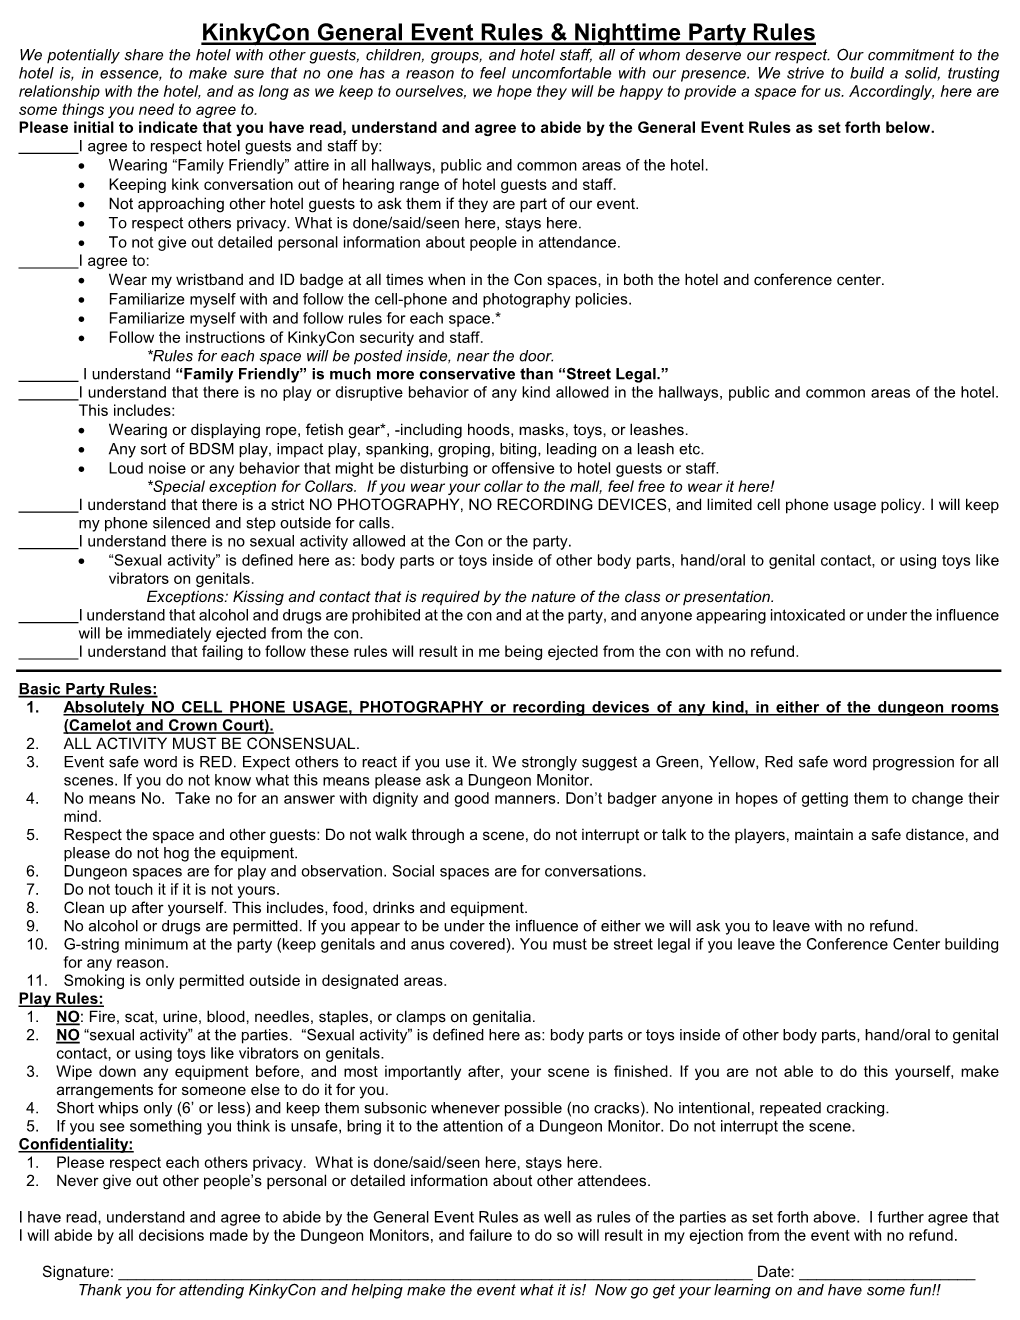 Kinkycon General Event Rules & Nighttime Party Rules